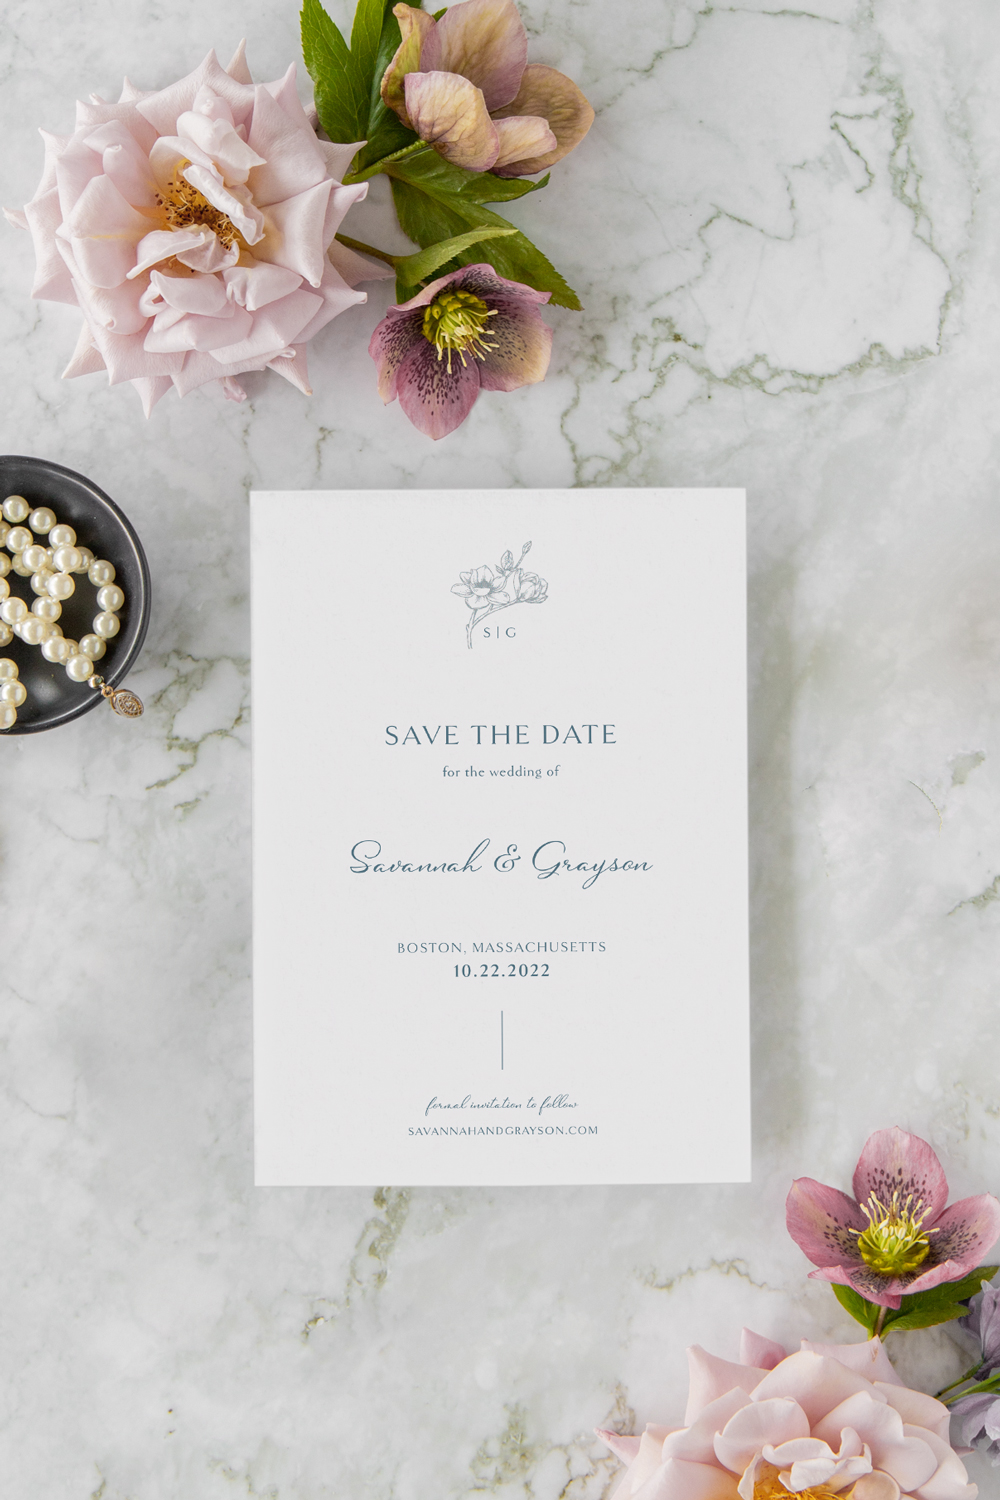 traditional-save-the-date-card-dusty-blue-seventhandanderson